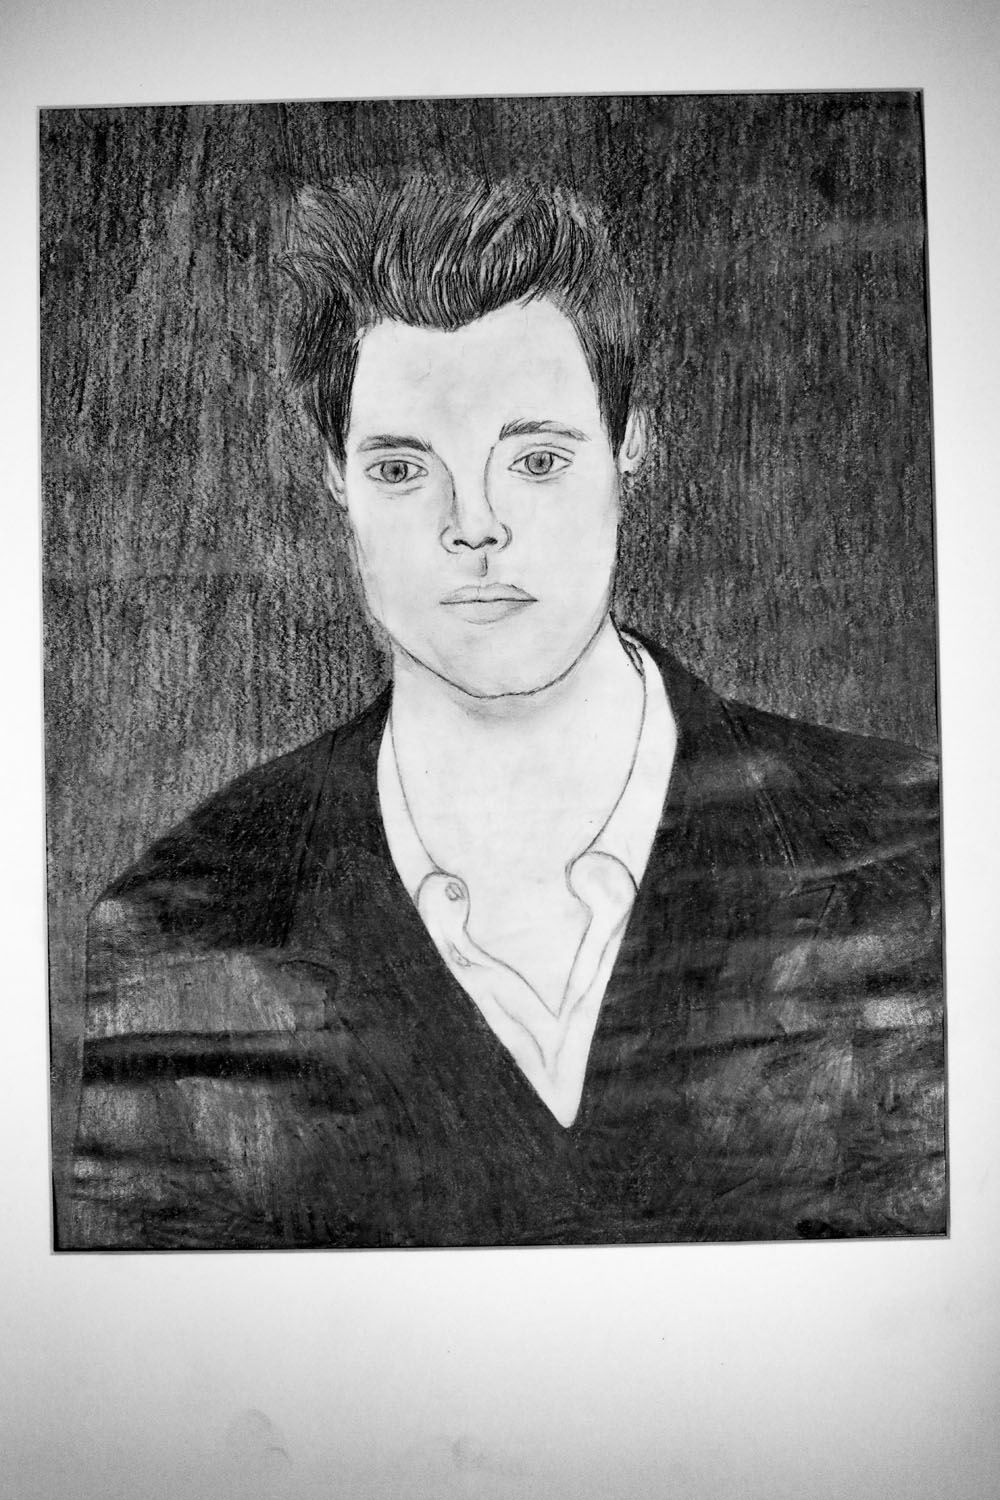 Pencil drawing of man with a jacket